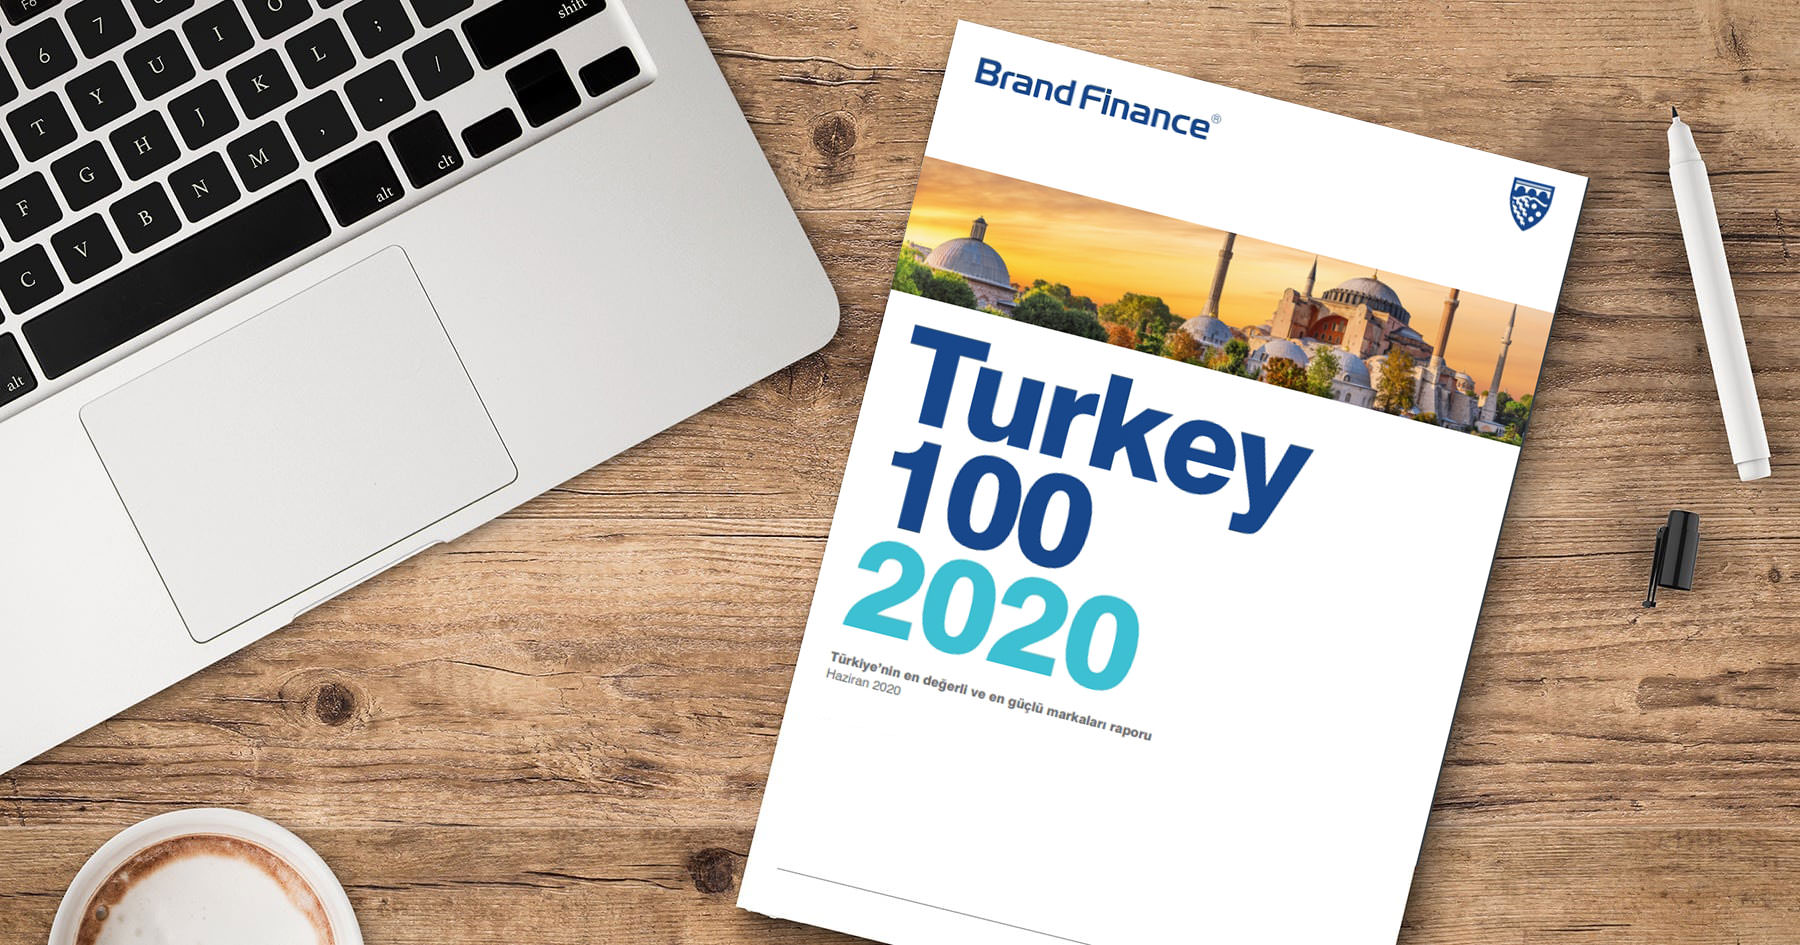 Brand Finance 2020 Results Are Revealed: Alarko Carrier Maintains Its Position Among “Turkey's Most Valuable 100 Brands"